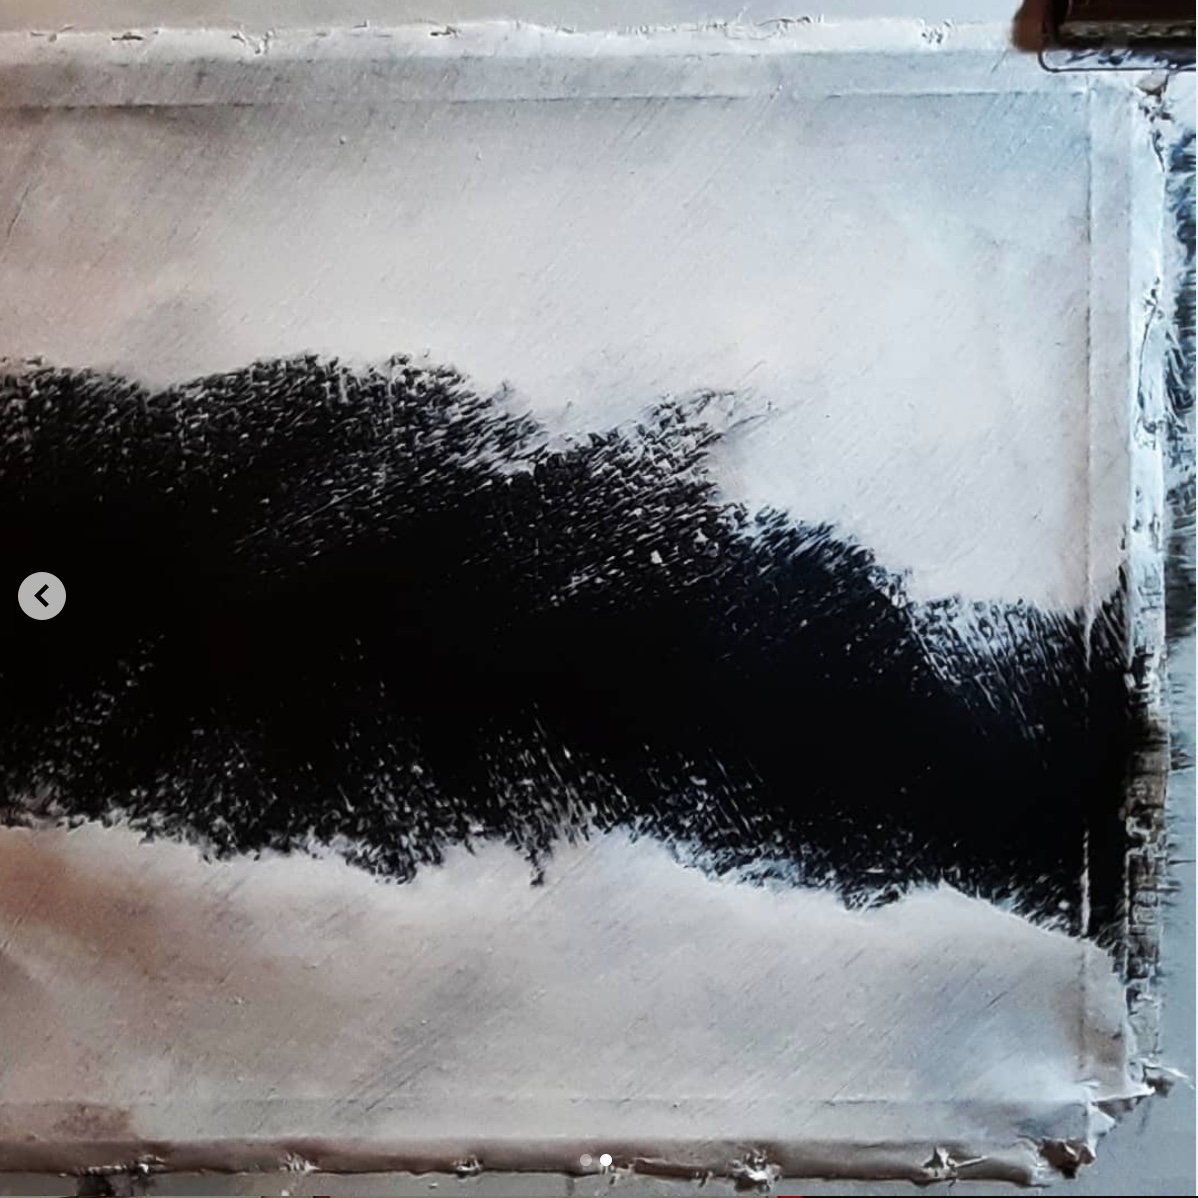 Dirty filter 'Slash 3' painting on scoured canvas